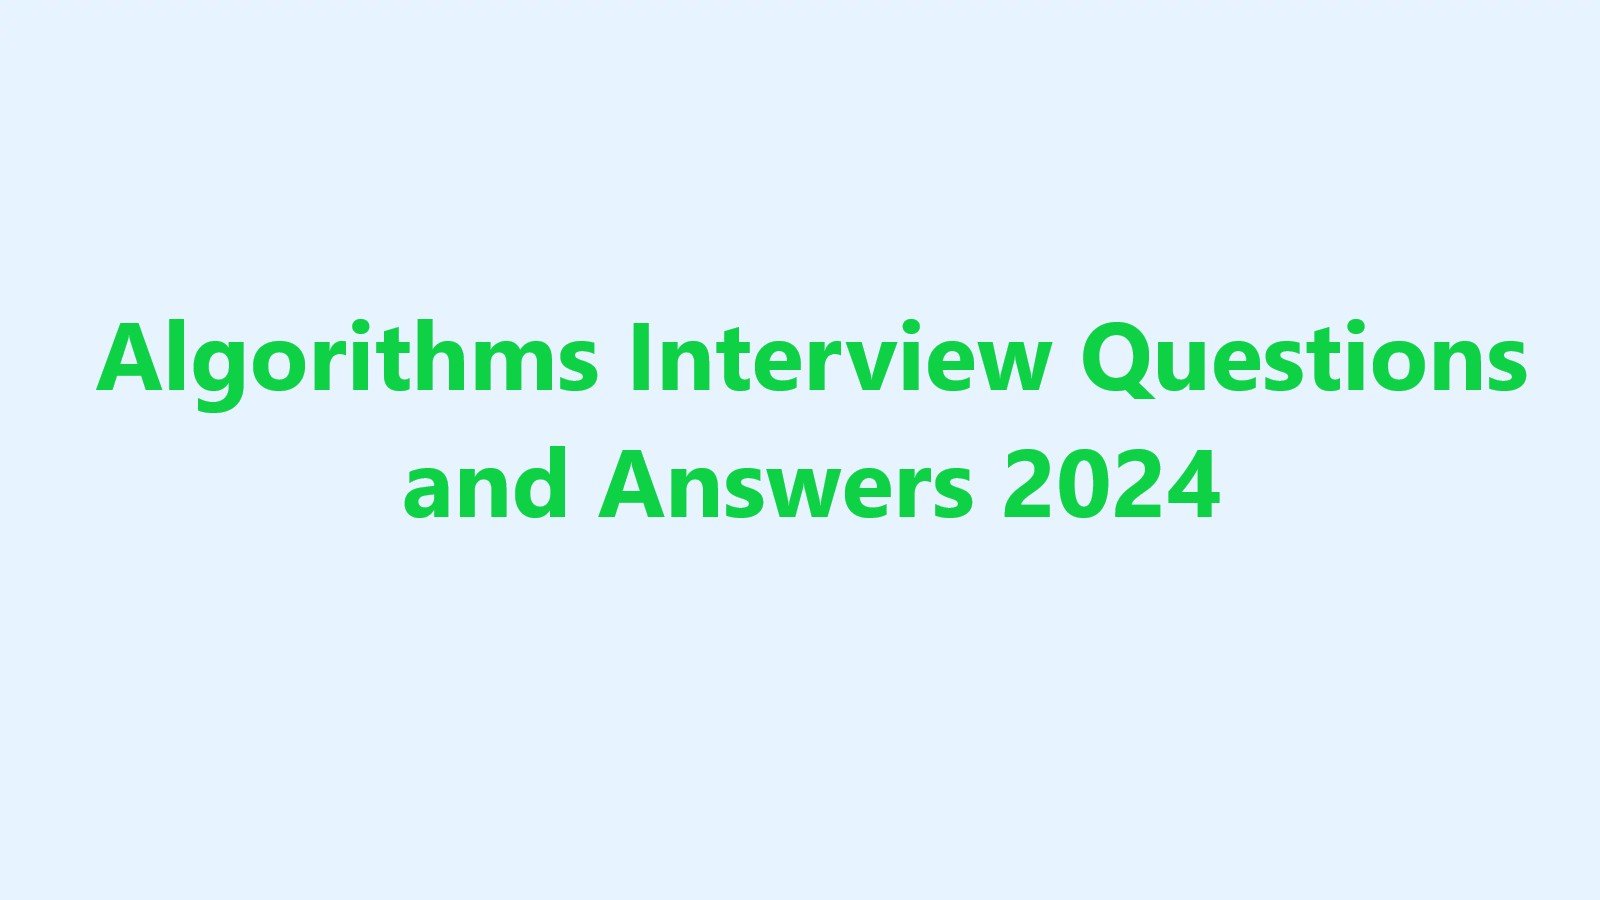 Algorithms Interview Questions and Answers 2024